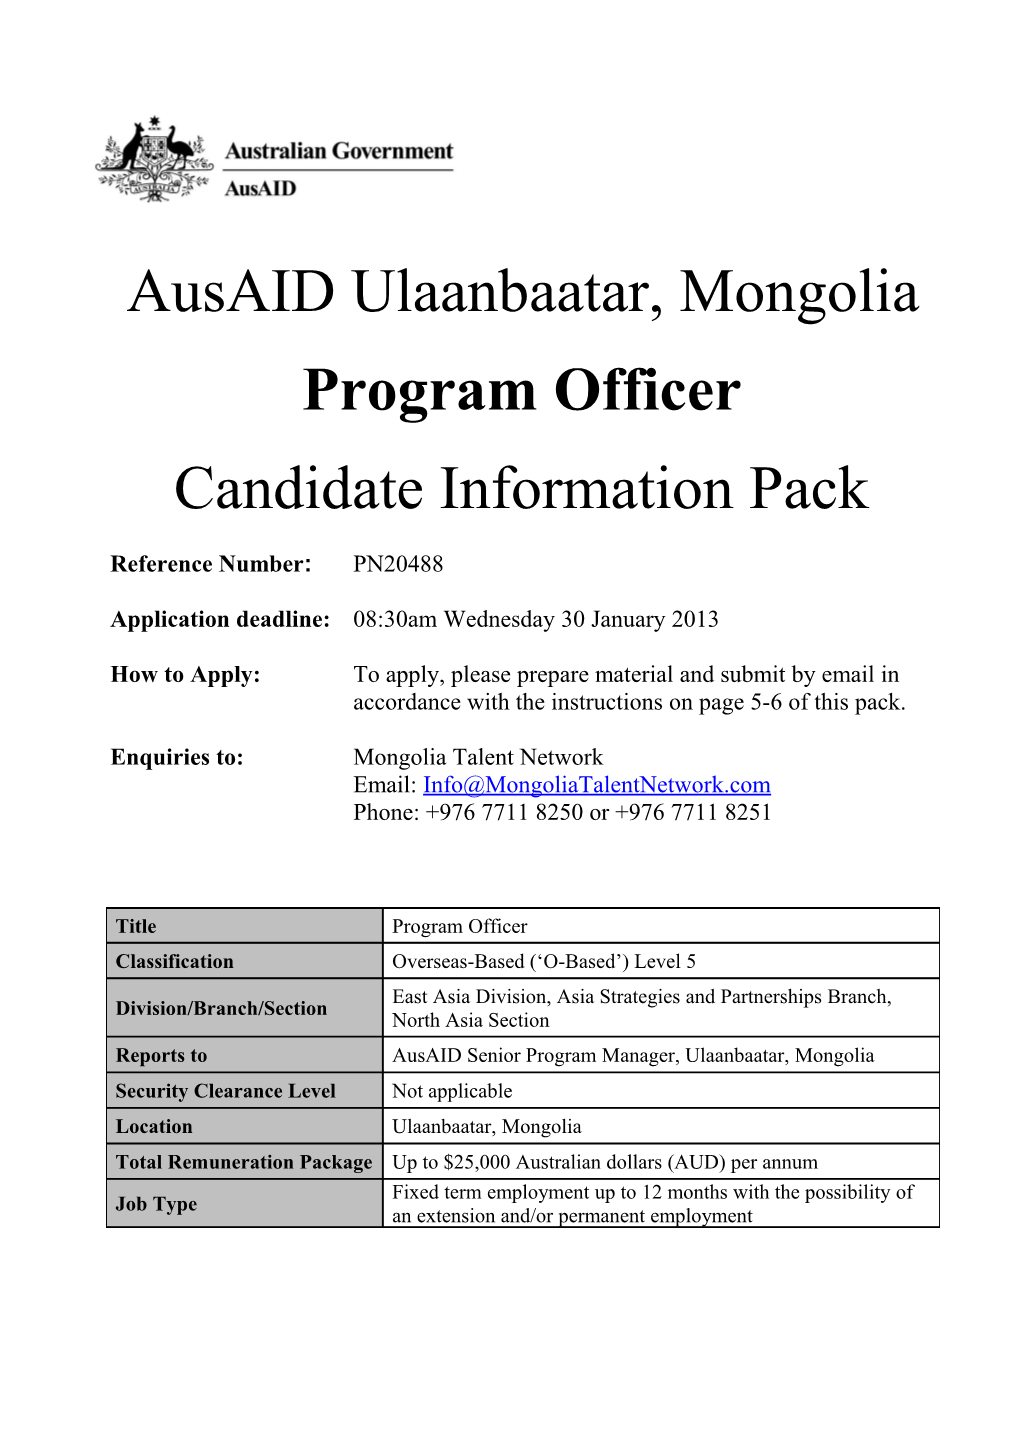 Ausaid Program Officer - Mongolia: Candidate Information Pack PN20488